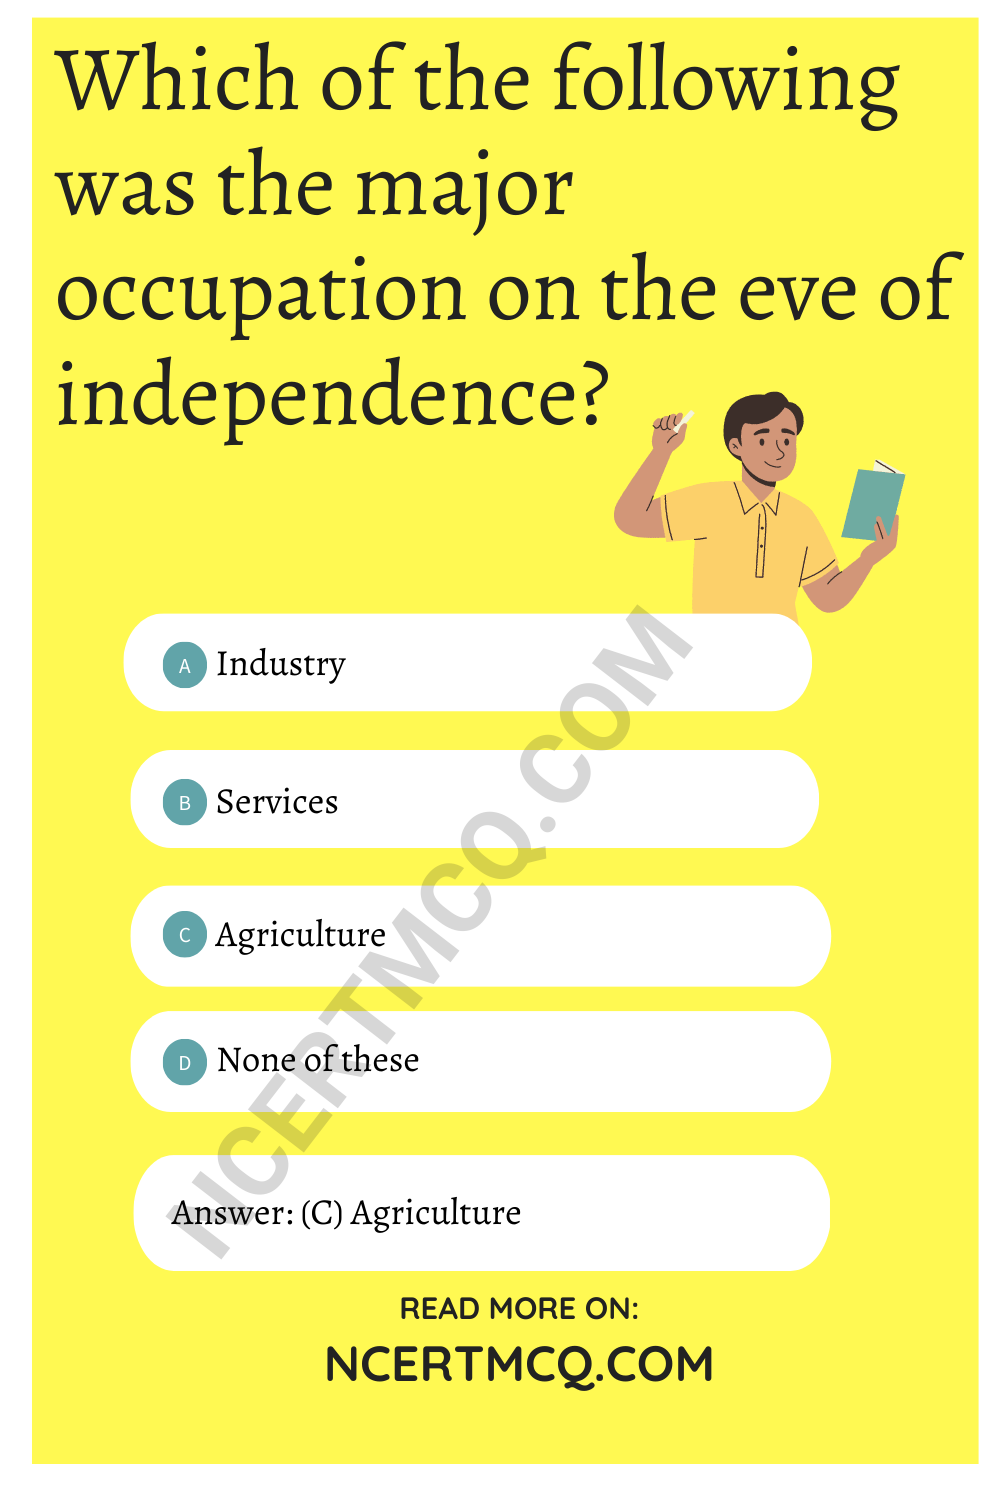 Which of the following was the major occupation on the eve of independence?